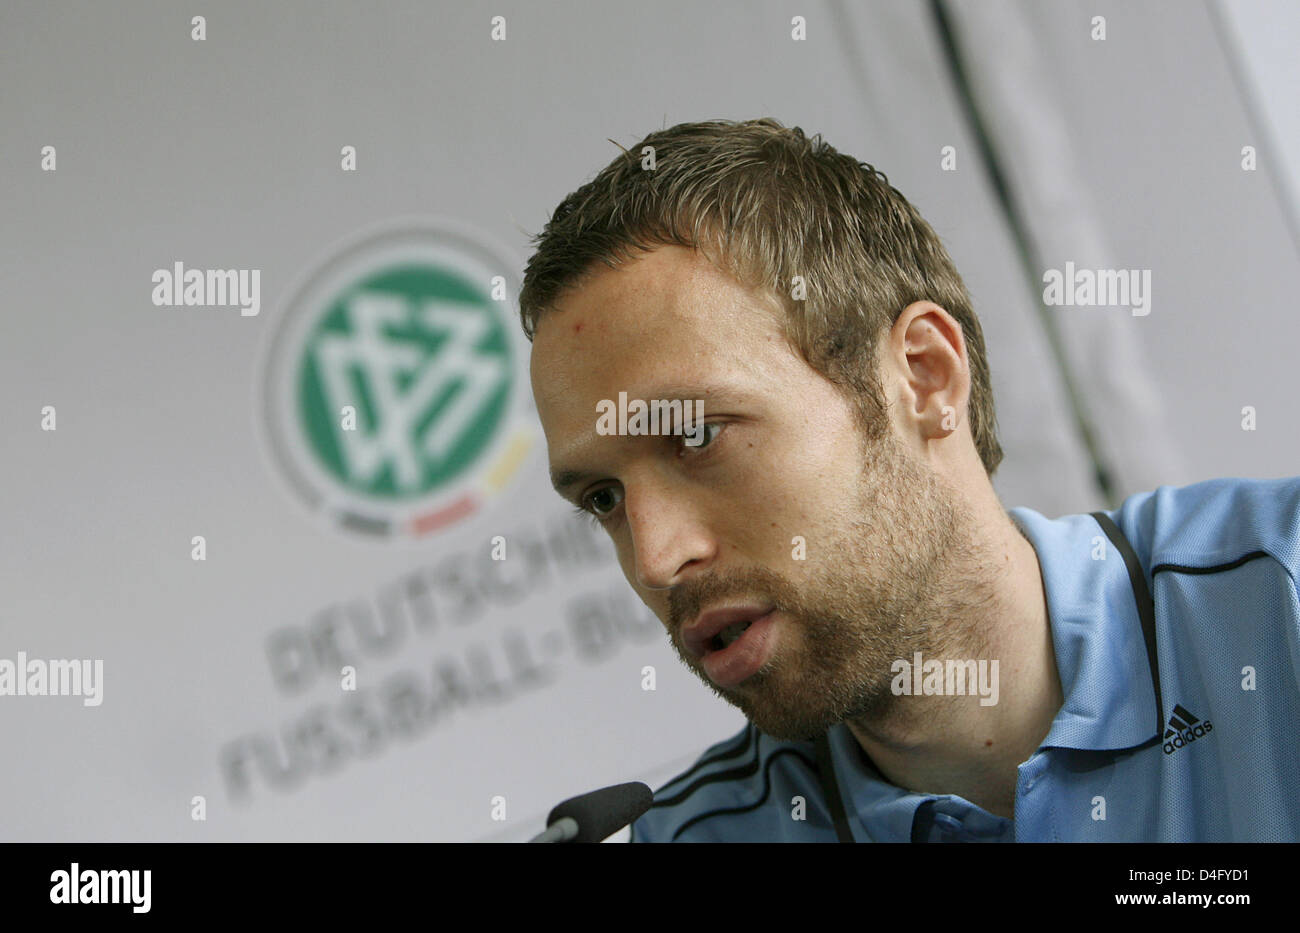 German international right-back Andreas Hinkel pictured during a press conference in Oberhaching, Germany, 04 September 2008. The German national squad will face the teams of Liechtenstein on 06 September and Finland on 10 September for FIFA World Cup 2010 qualifiers. Photo: ANGELIKA WARMUTH Stock Photo